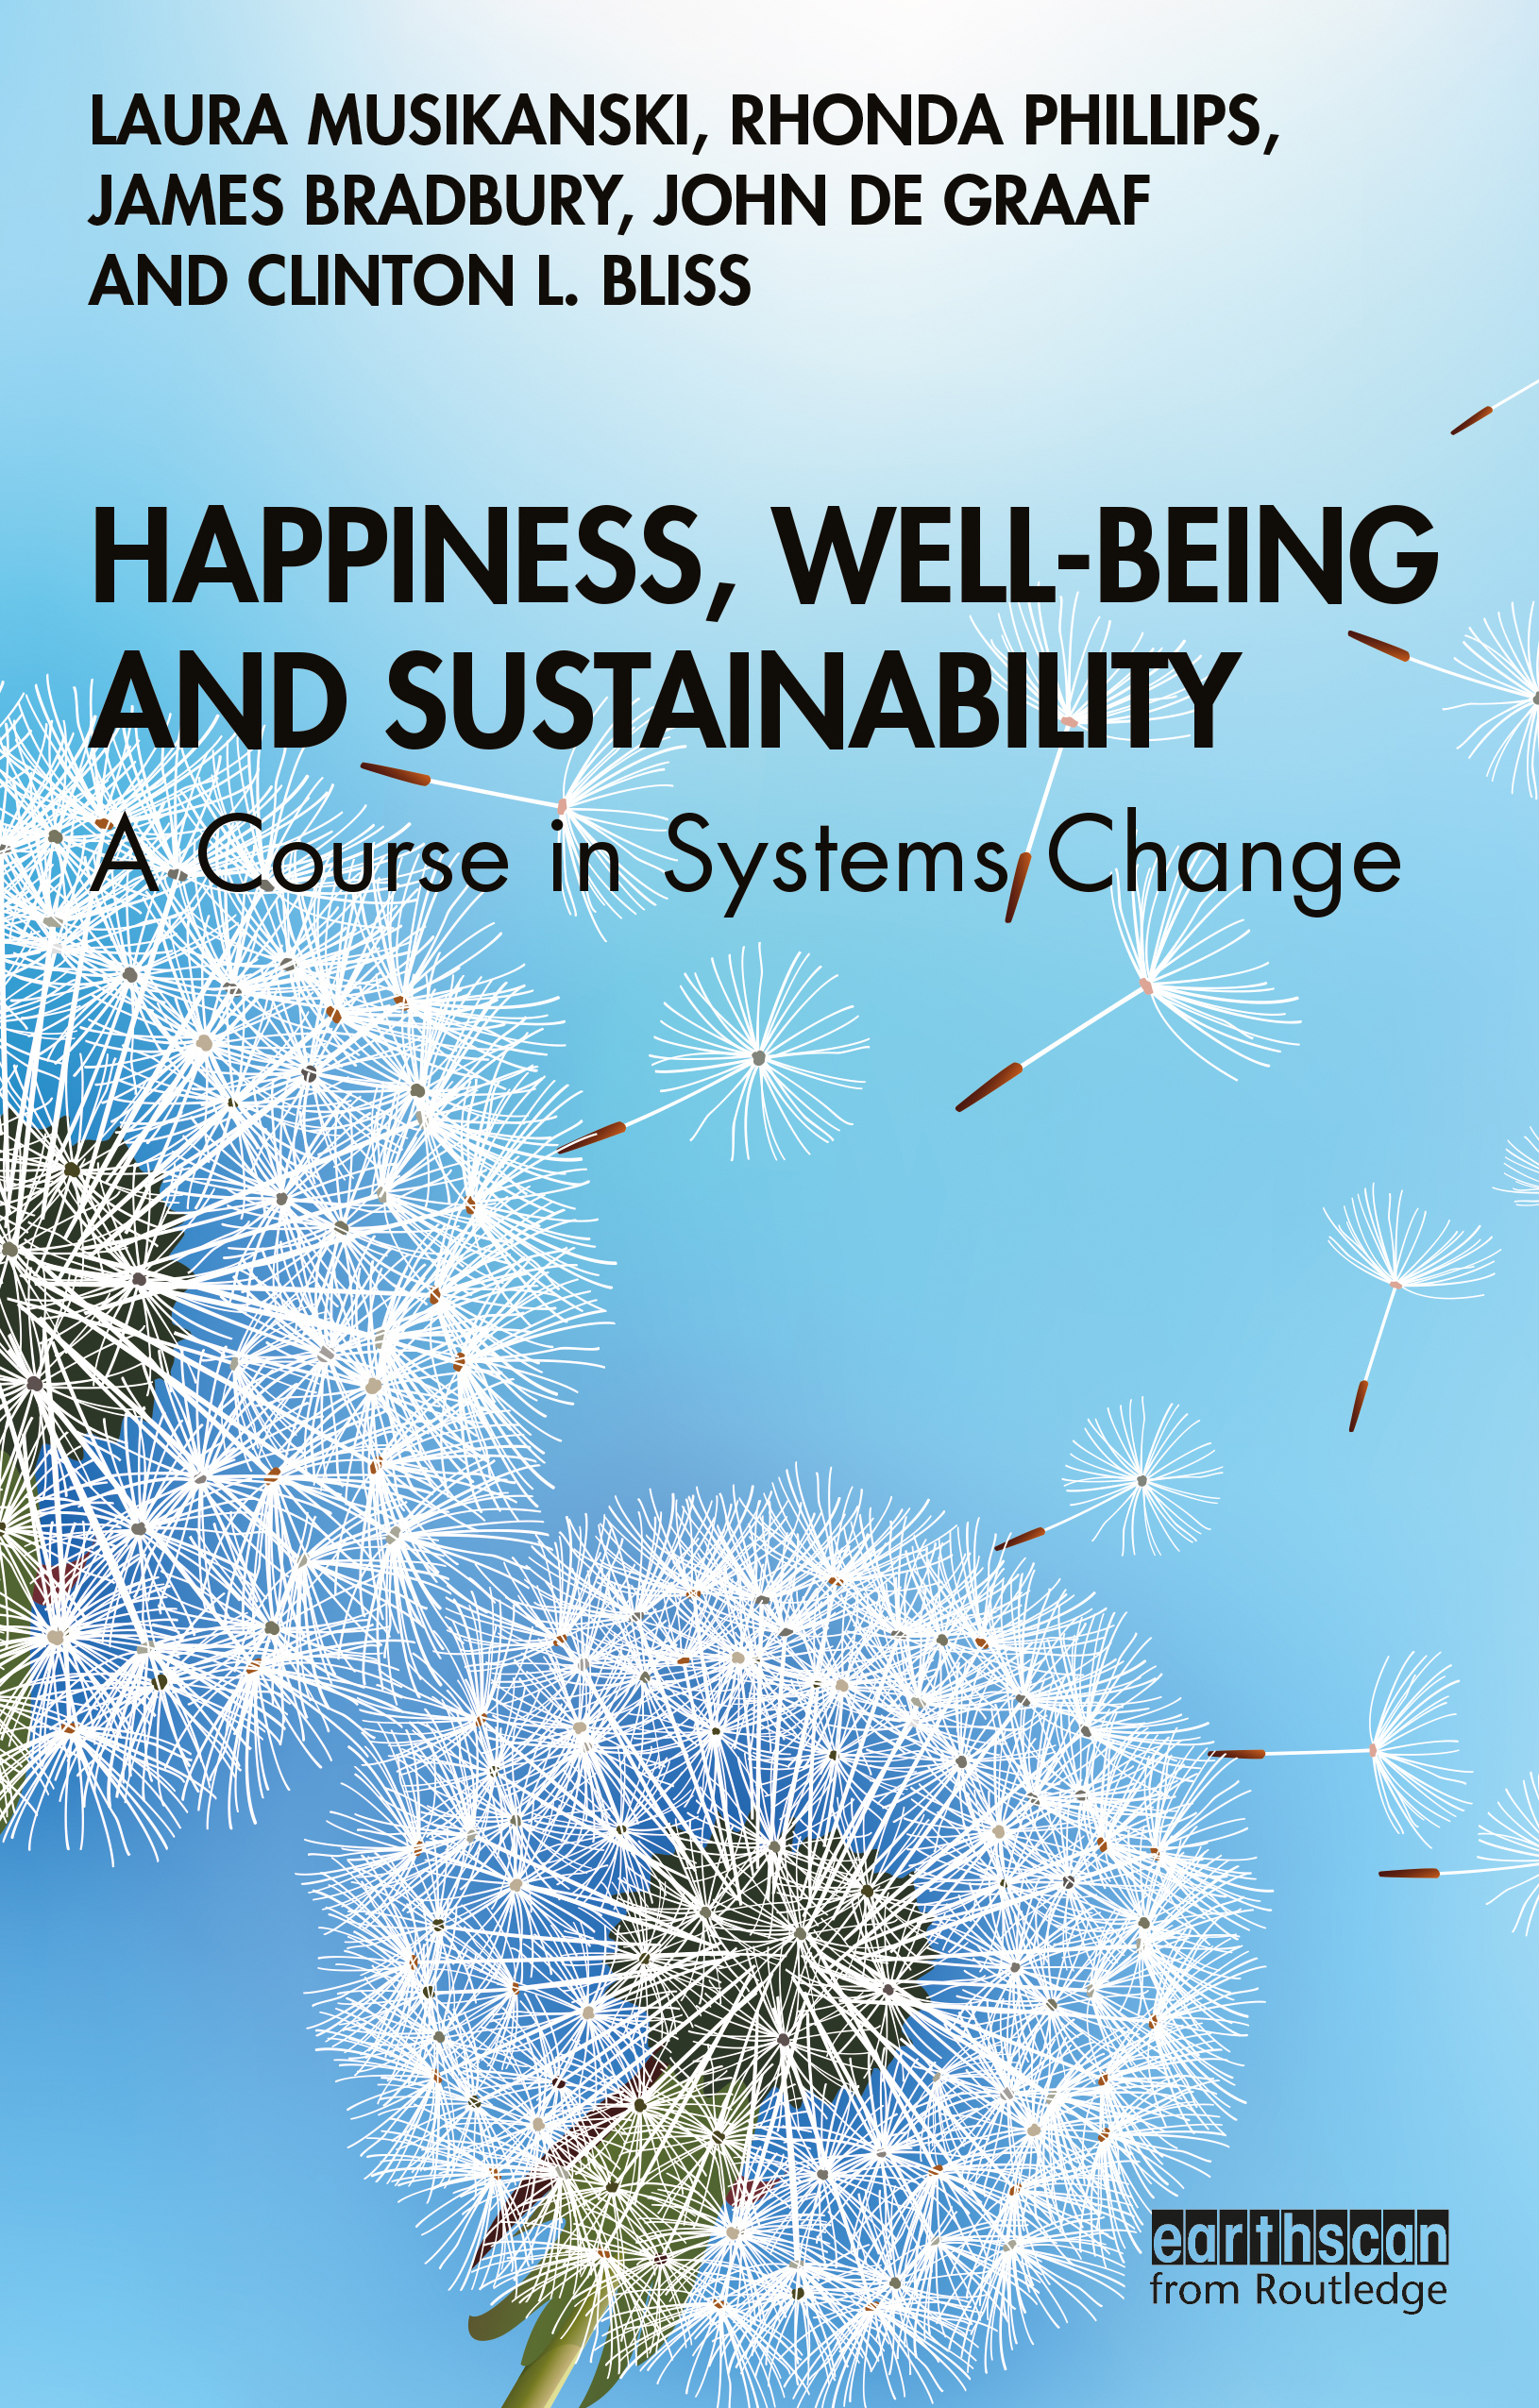 Bokomslag "Happiness, well-being and sustainability.